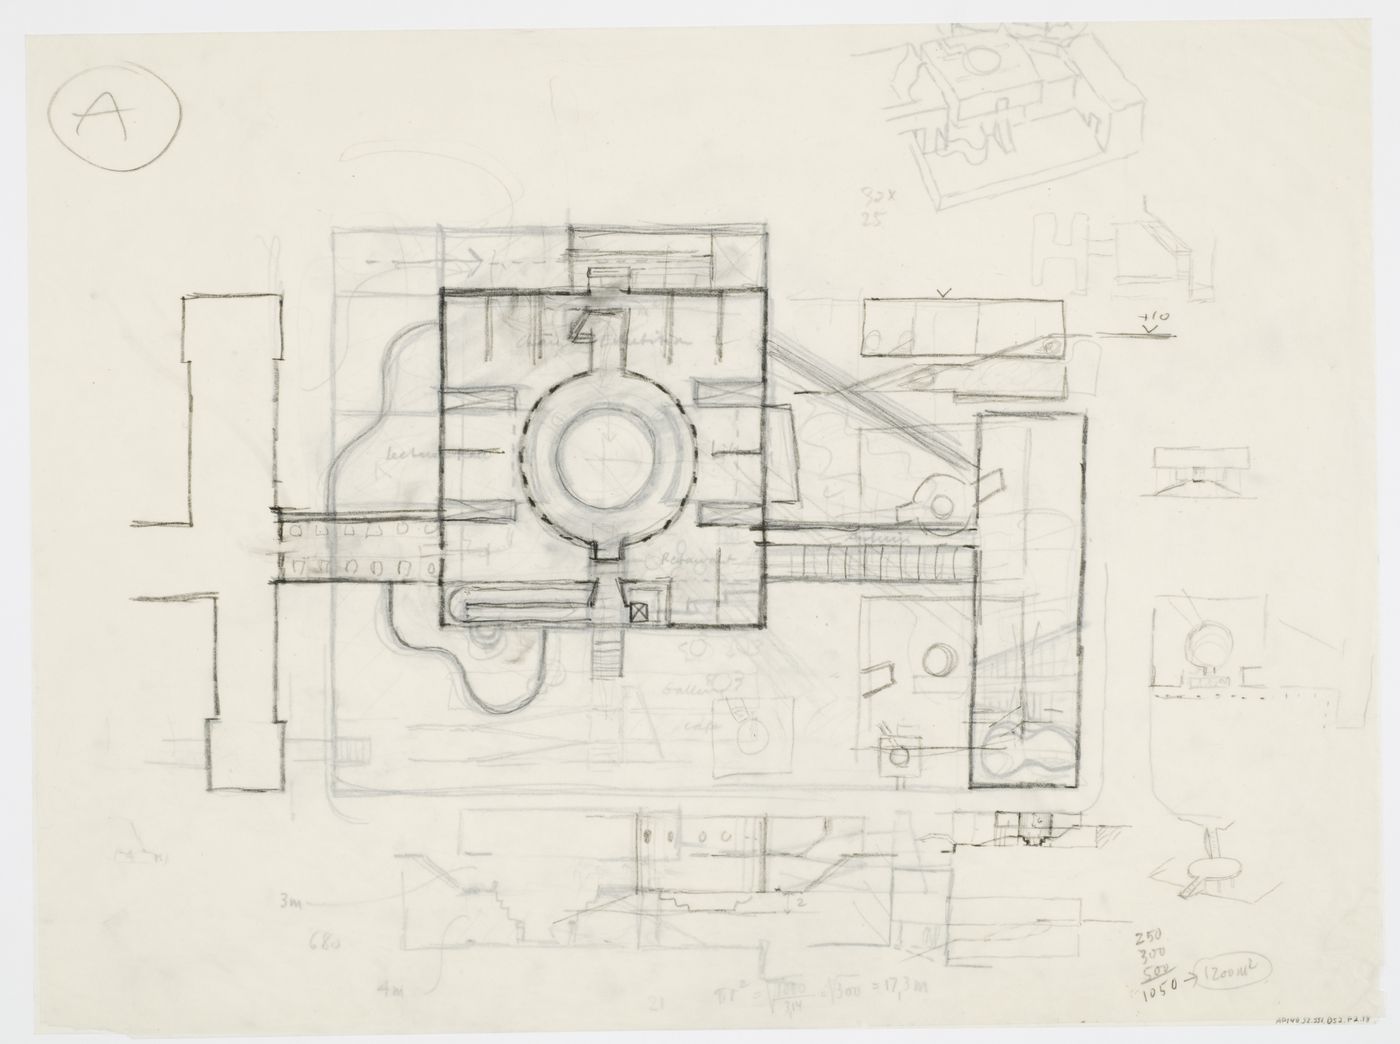 Staatsgalerie, Stuttgart, Germany: plan and sketches